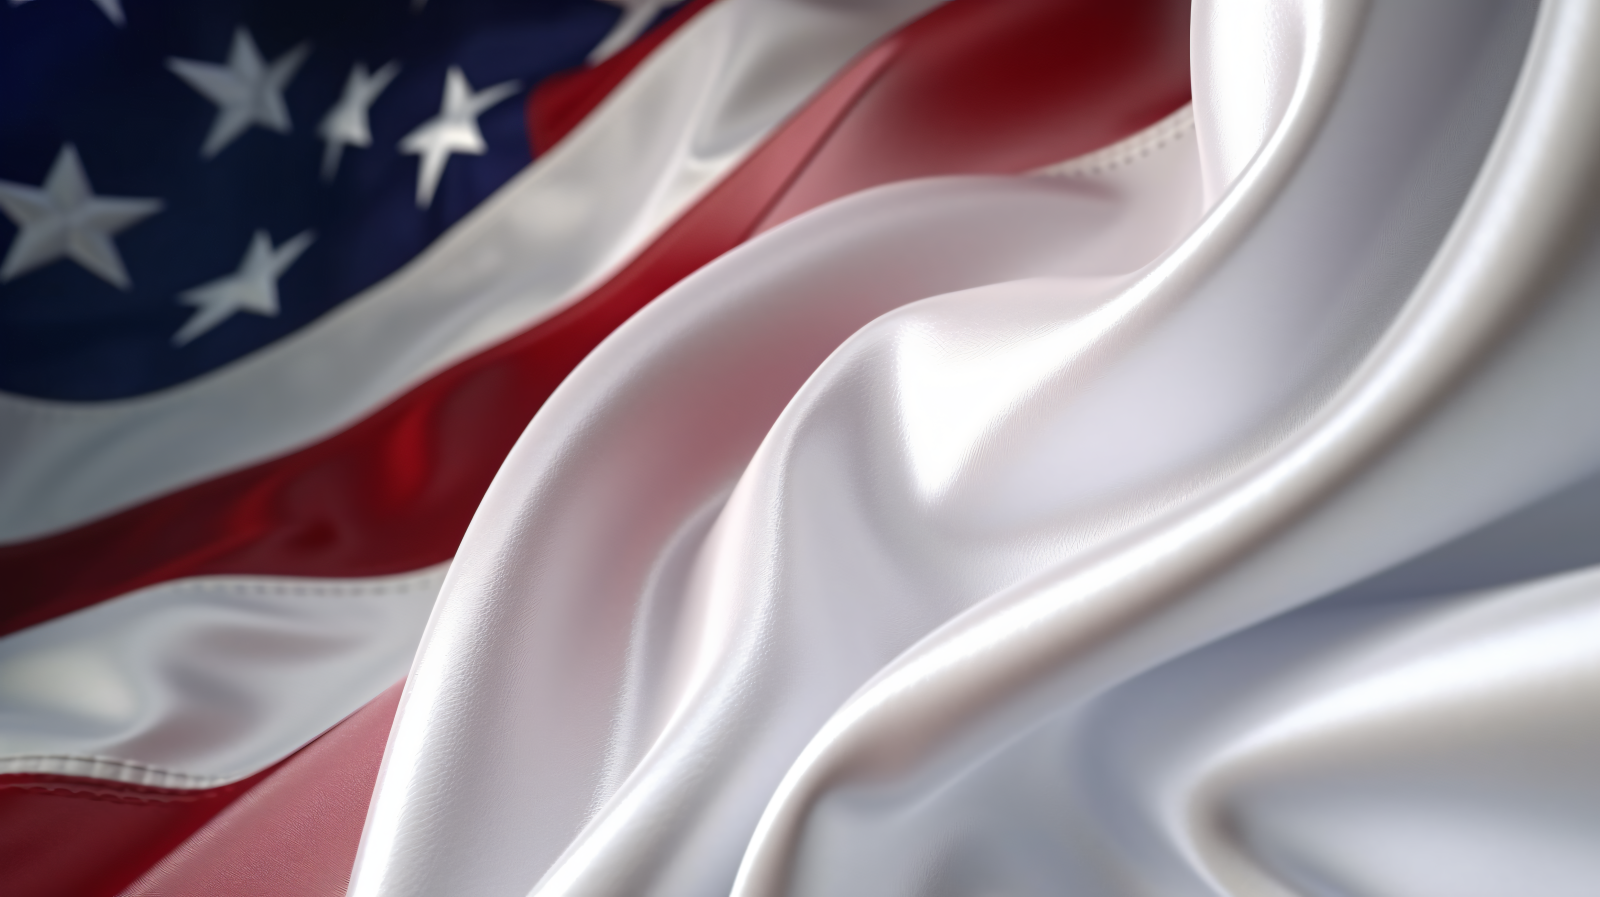 Close up the USA Waving flag in corner with copy space 36